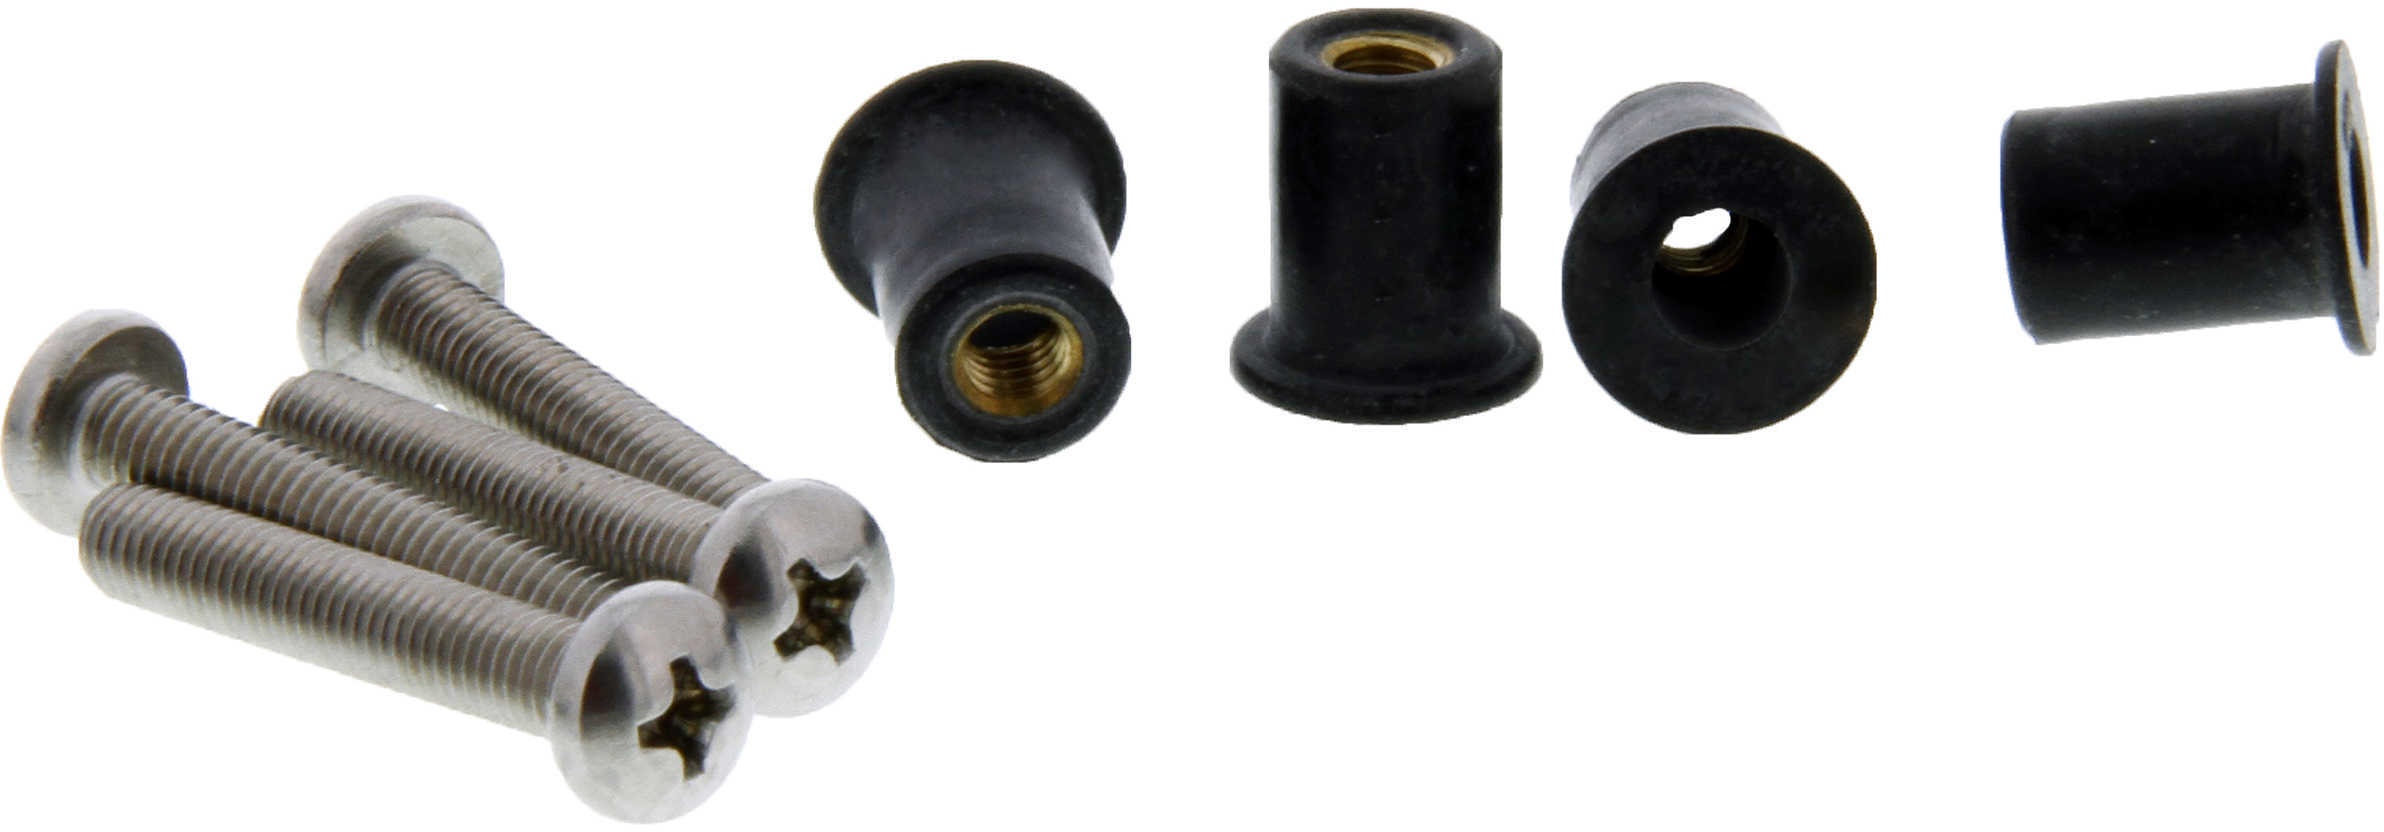 Scotty 133-100 Well Nut Mounting Kit - 100 Pack